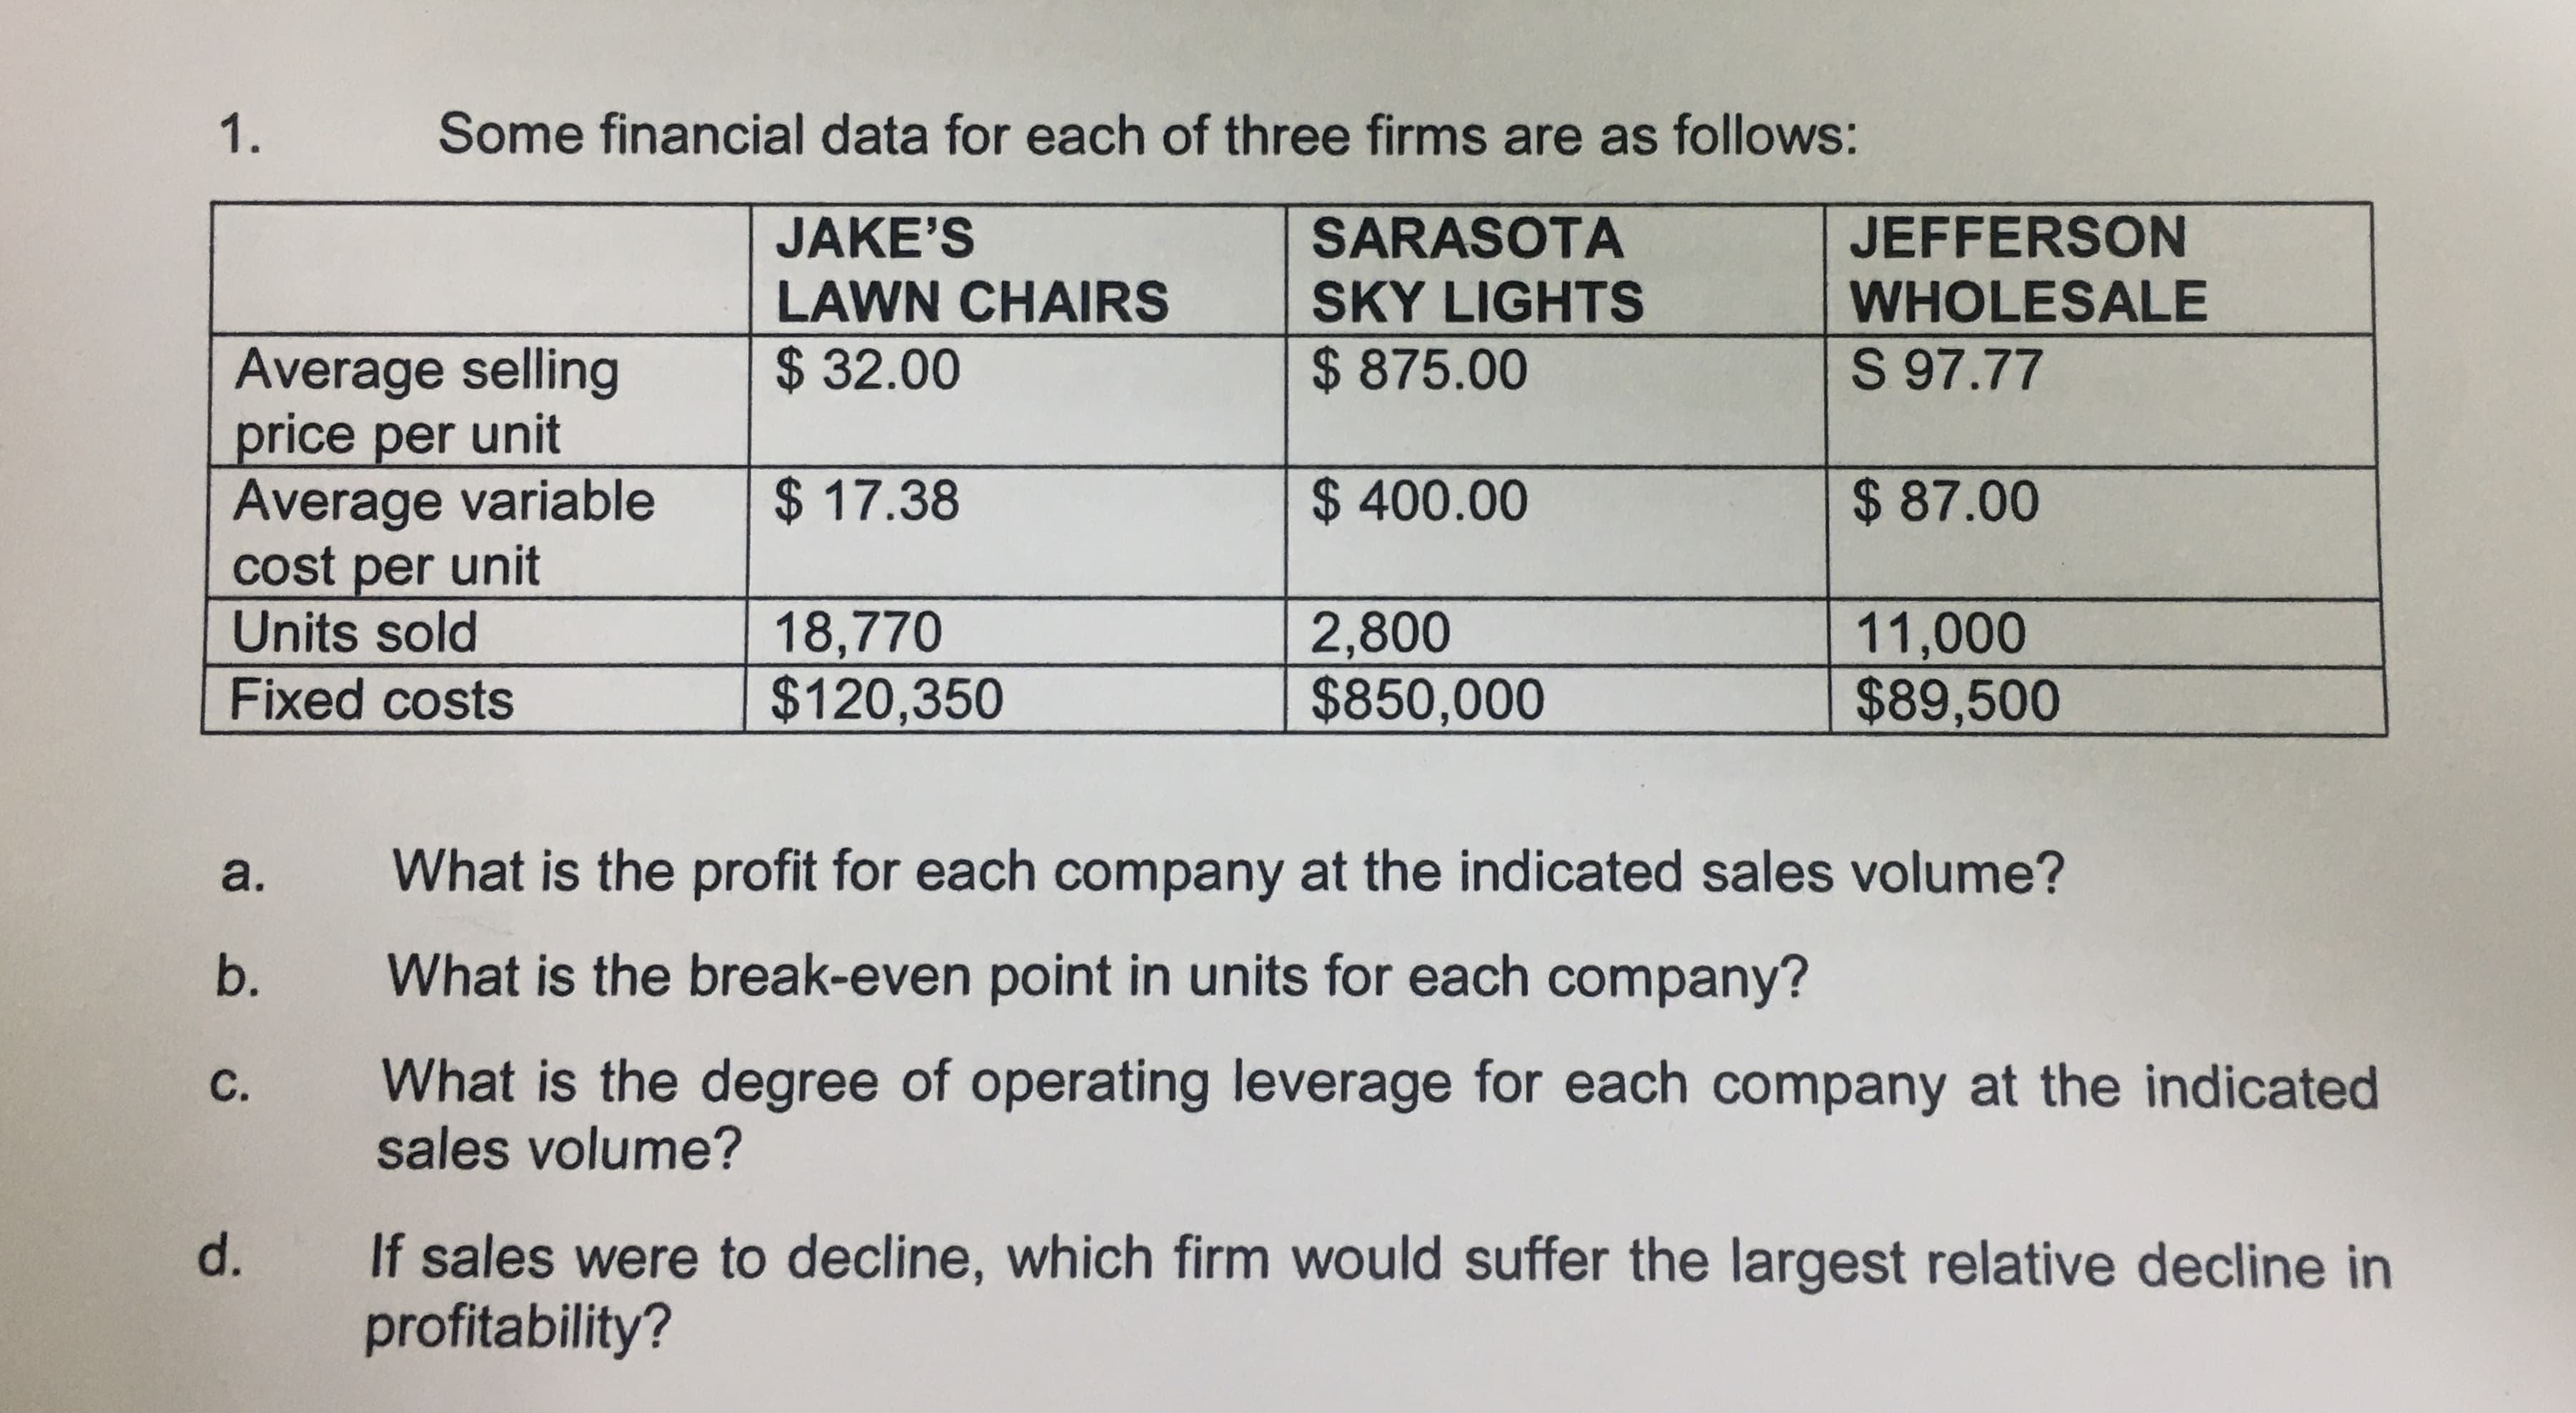 Some financial data for each of three firms are as follows:
1.
JEFFERSON
JAKE'S
LAWN CHAIRS
SARASOTA
SKY LIGHTS
WHOLESALE
Average selling
price per unit
Average variable
cost per unit
Units sold
S 97.77
$ 32.00
$ 875.00
$ 87.00
$ 17.38
$400.00
18,770
$120,350
2,800
$850,000
11,000
$89,500
Fixed costs
What is the profit for each company at the indicated sales volume?
a.
What is the break-even point in units for each company?
b.
What is the degree of operating leverage for each company at the indicated
sales volume?
с.
If sales were to decline, which firm would suffer the largest relative decline in
profitability?
d.
